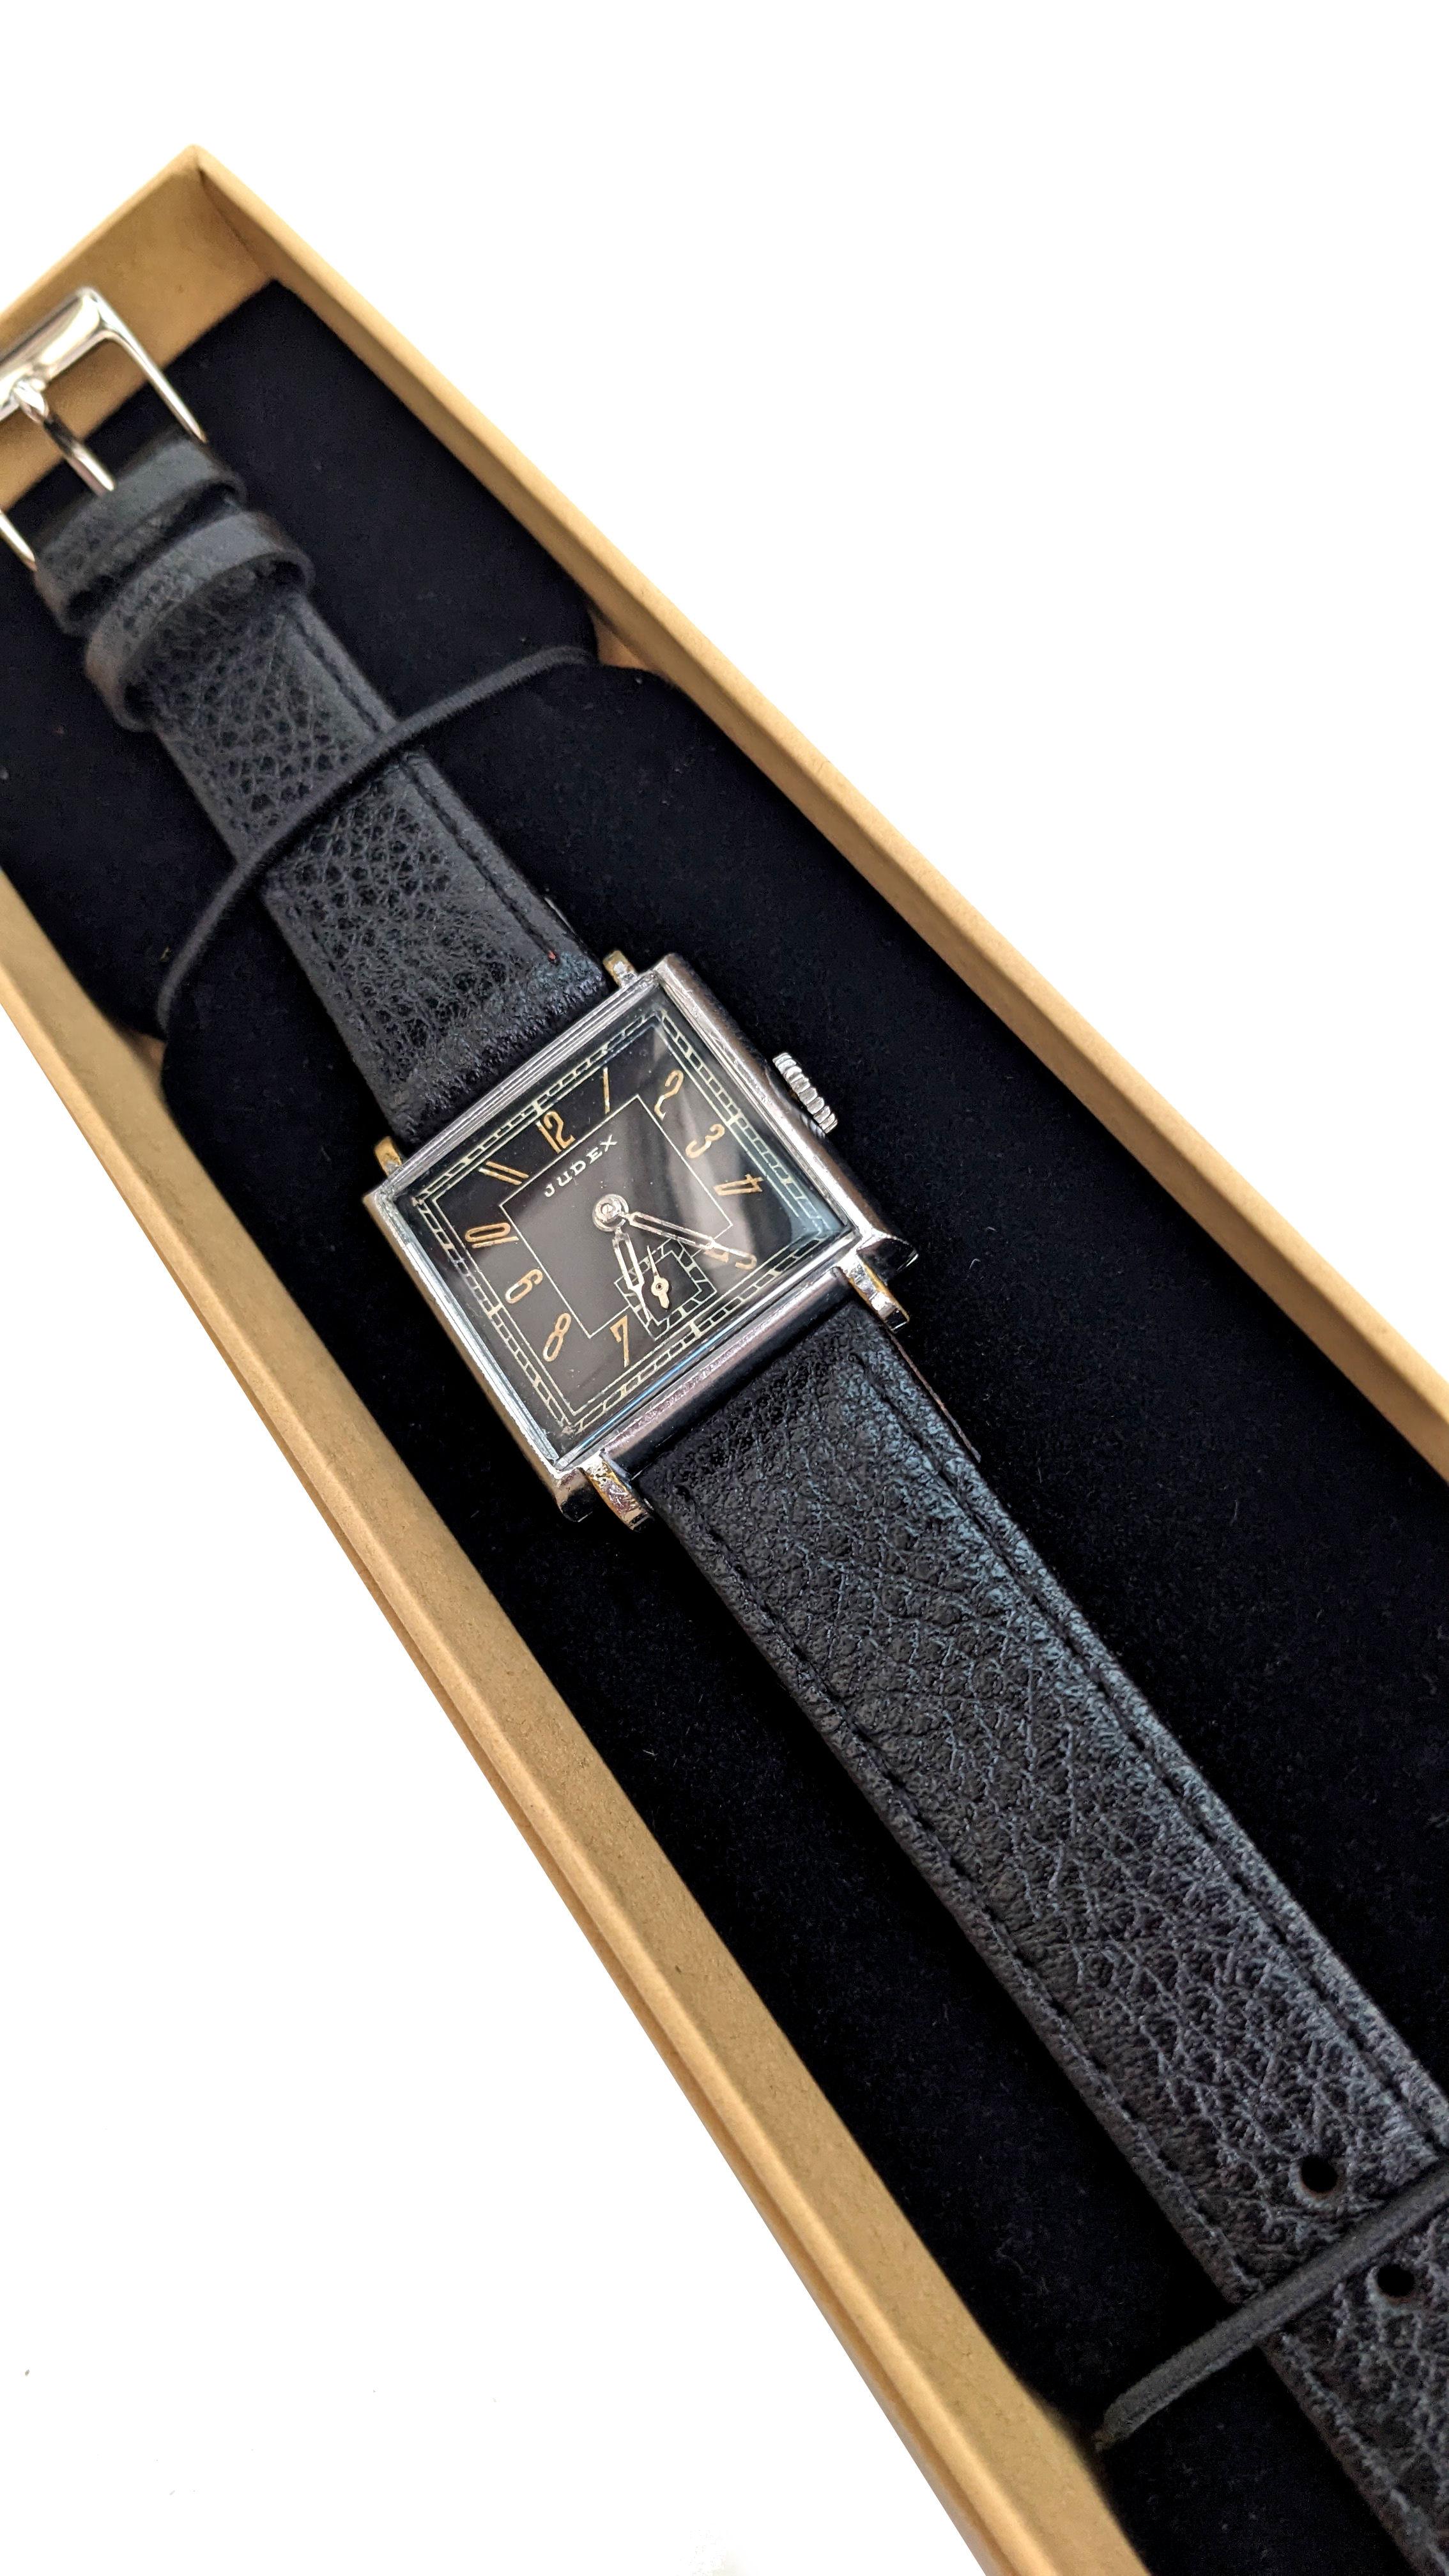 Recently serviced /Dec 2023 and keeping very good time is this superb Art Deco gents manual wrist watch by the French watch makers company Judex. The watch casing is in great condition, free from engravings, tarnishing or erosion. The case